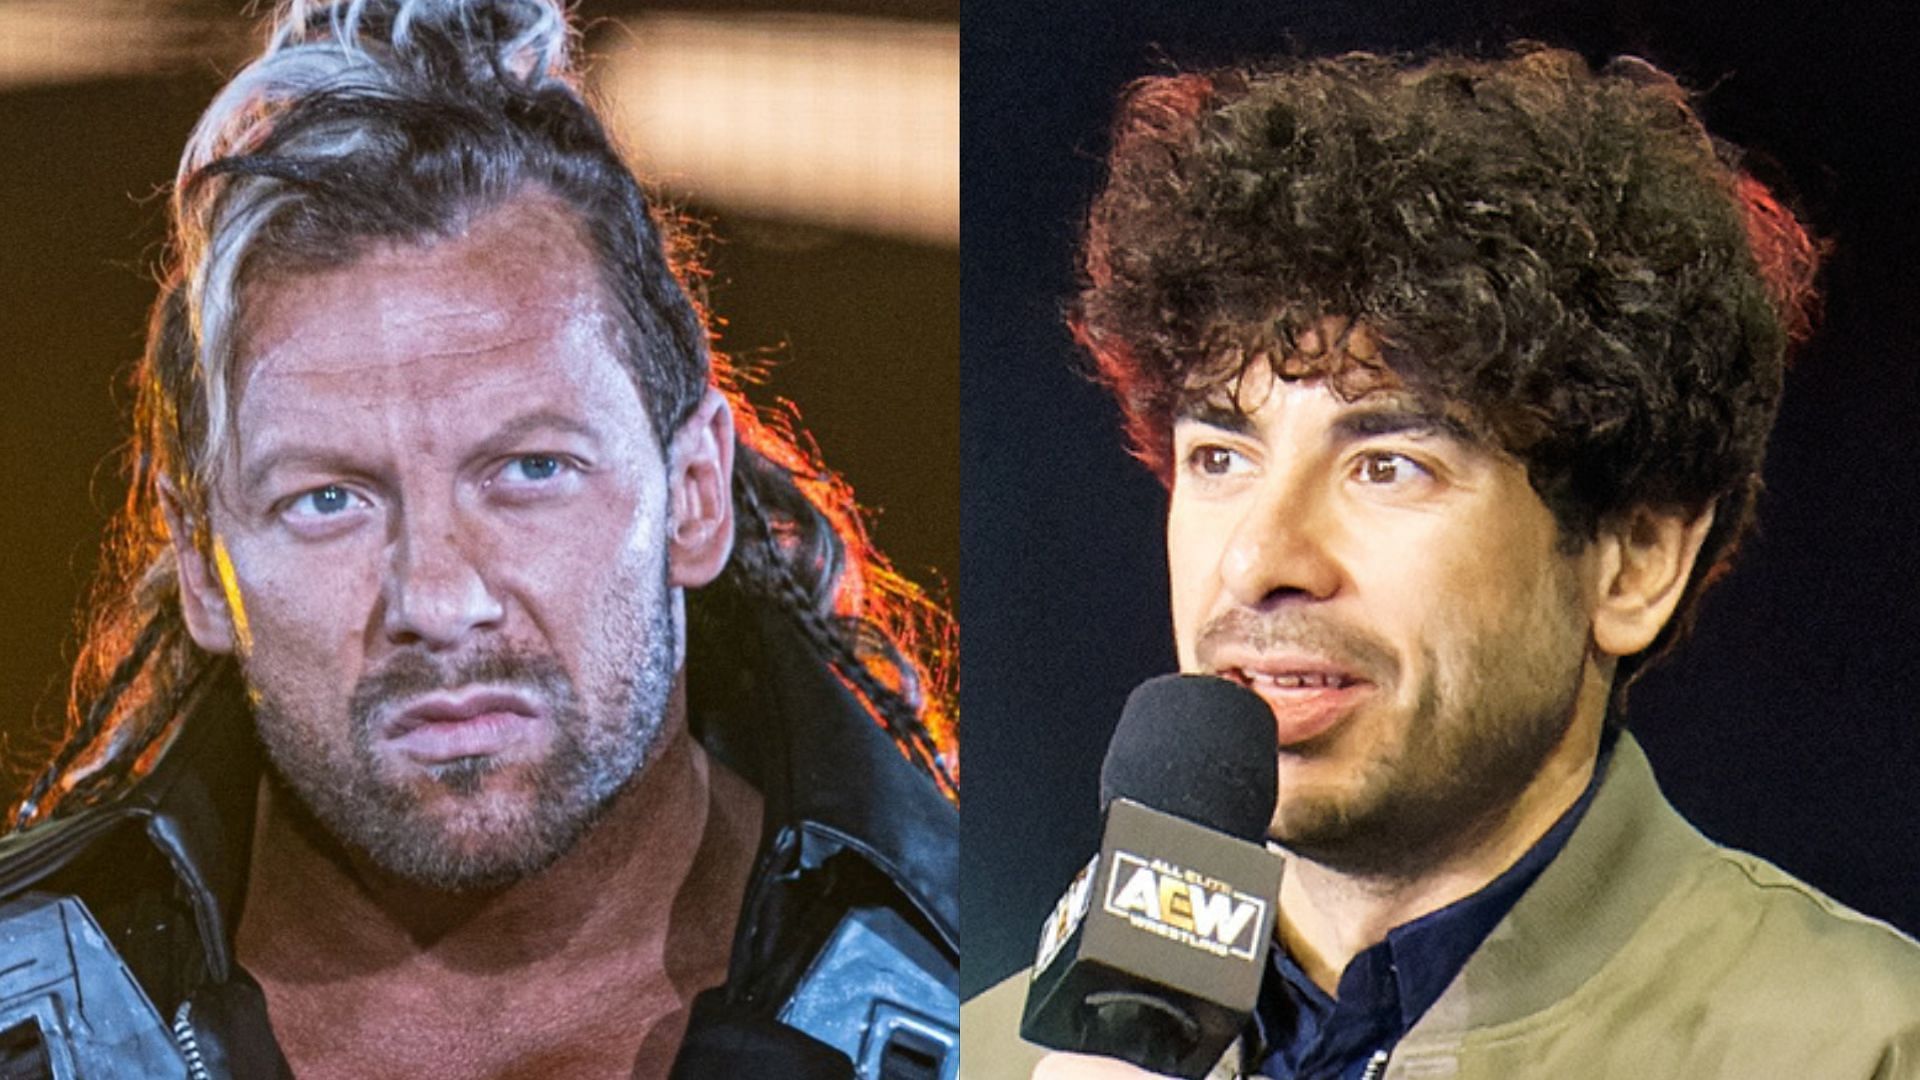 Kenny Omega has opened up about one of AEW